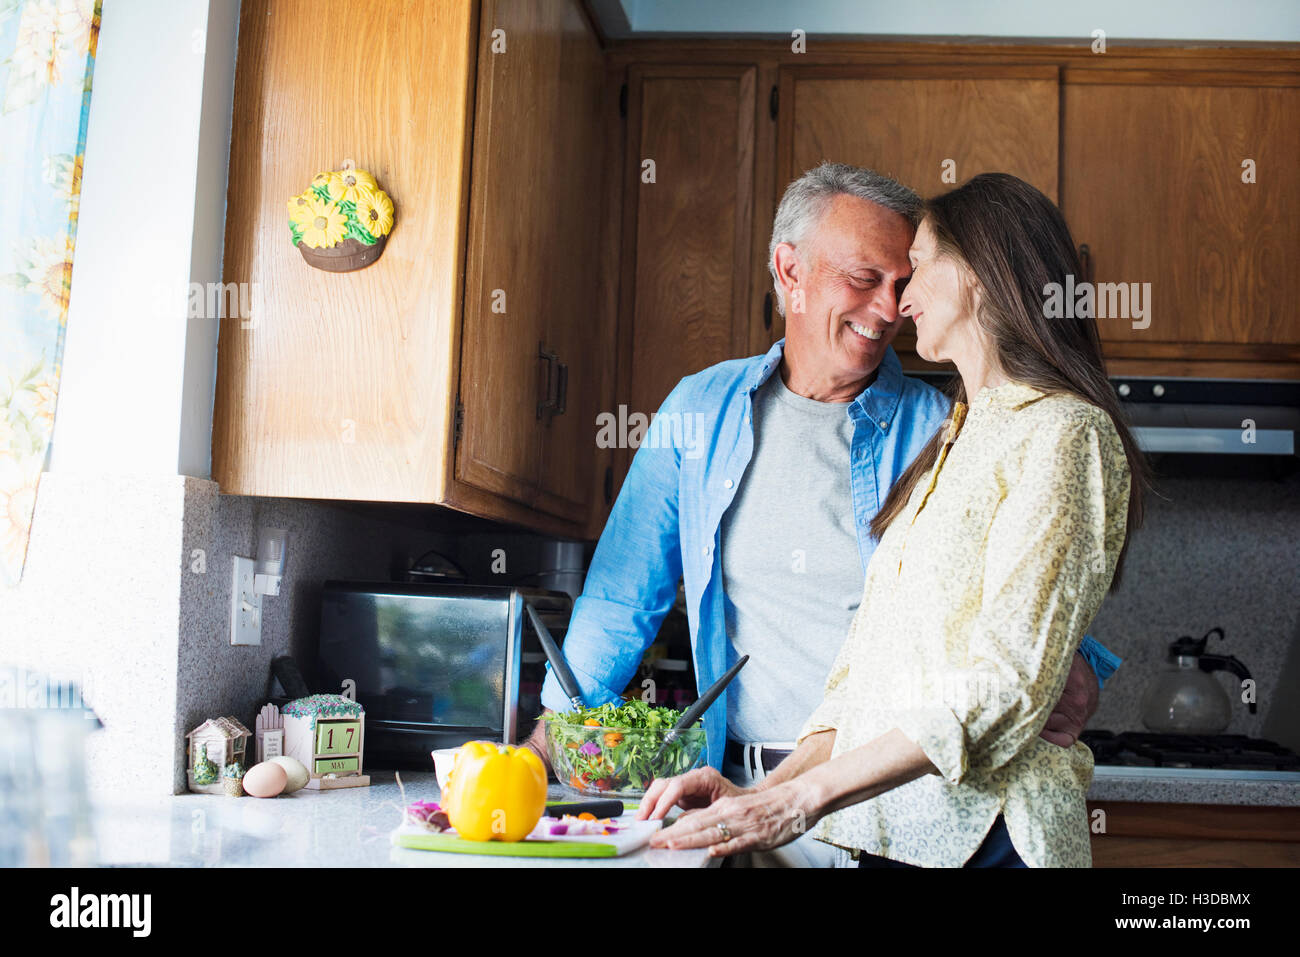 Smiling senior couple standing in a kitchen, preparing food. Stock Photo